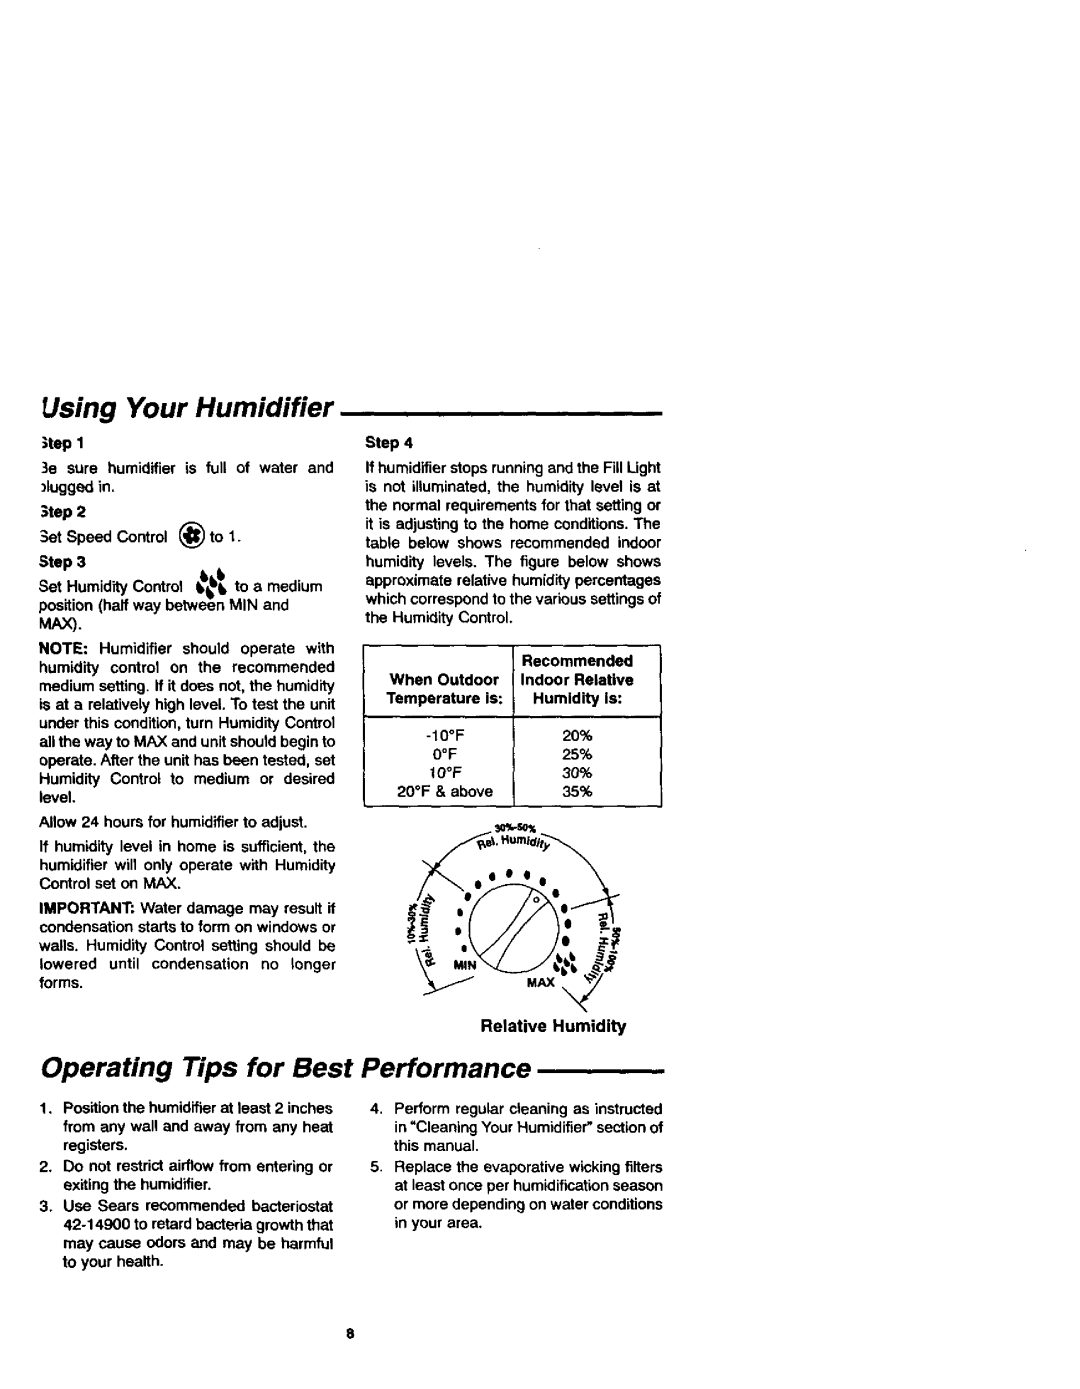 Sears 758.144131 owner manual Using Your Humidifier, Operating Tips for Best, Performance 